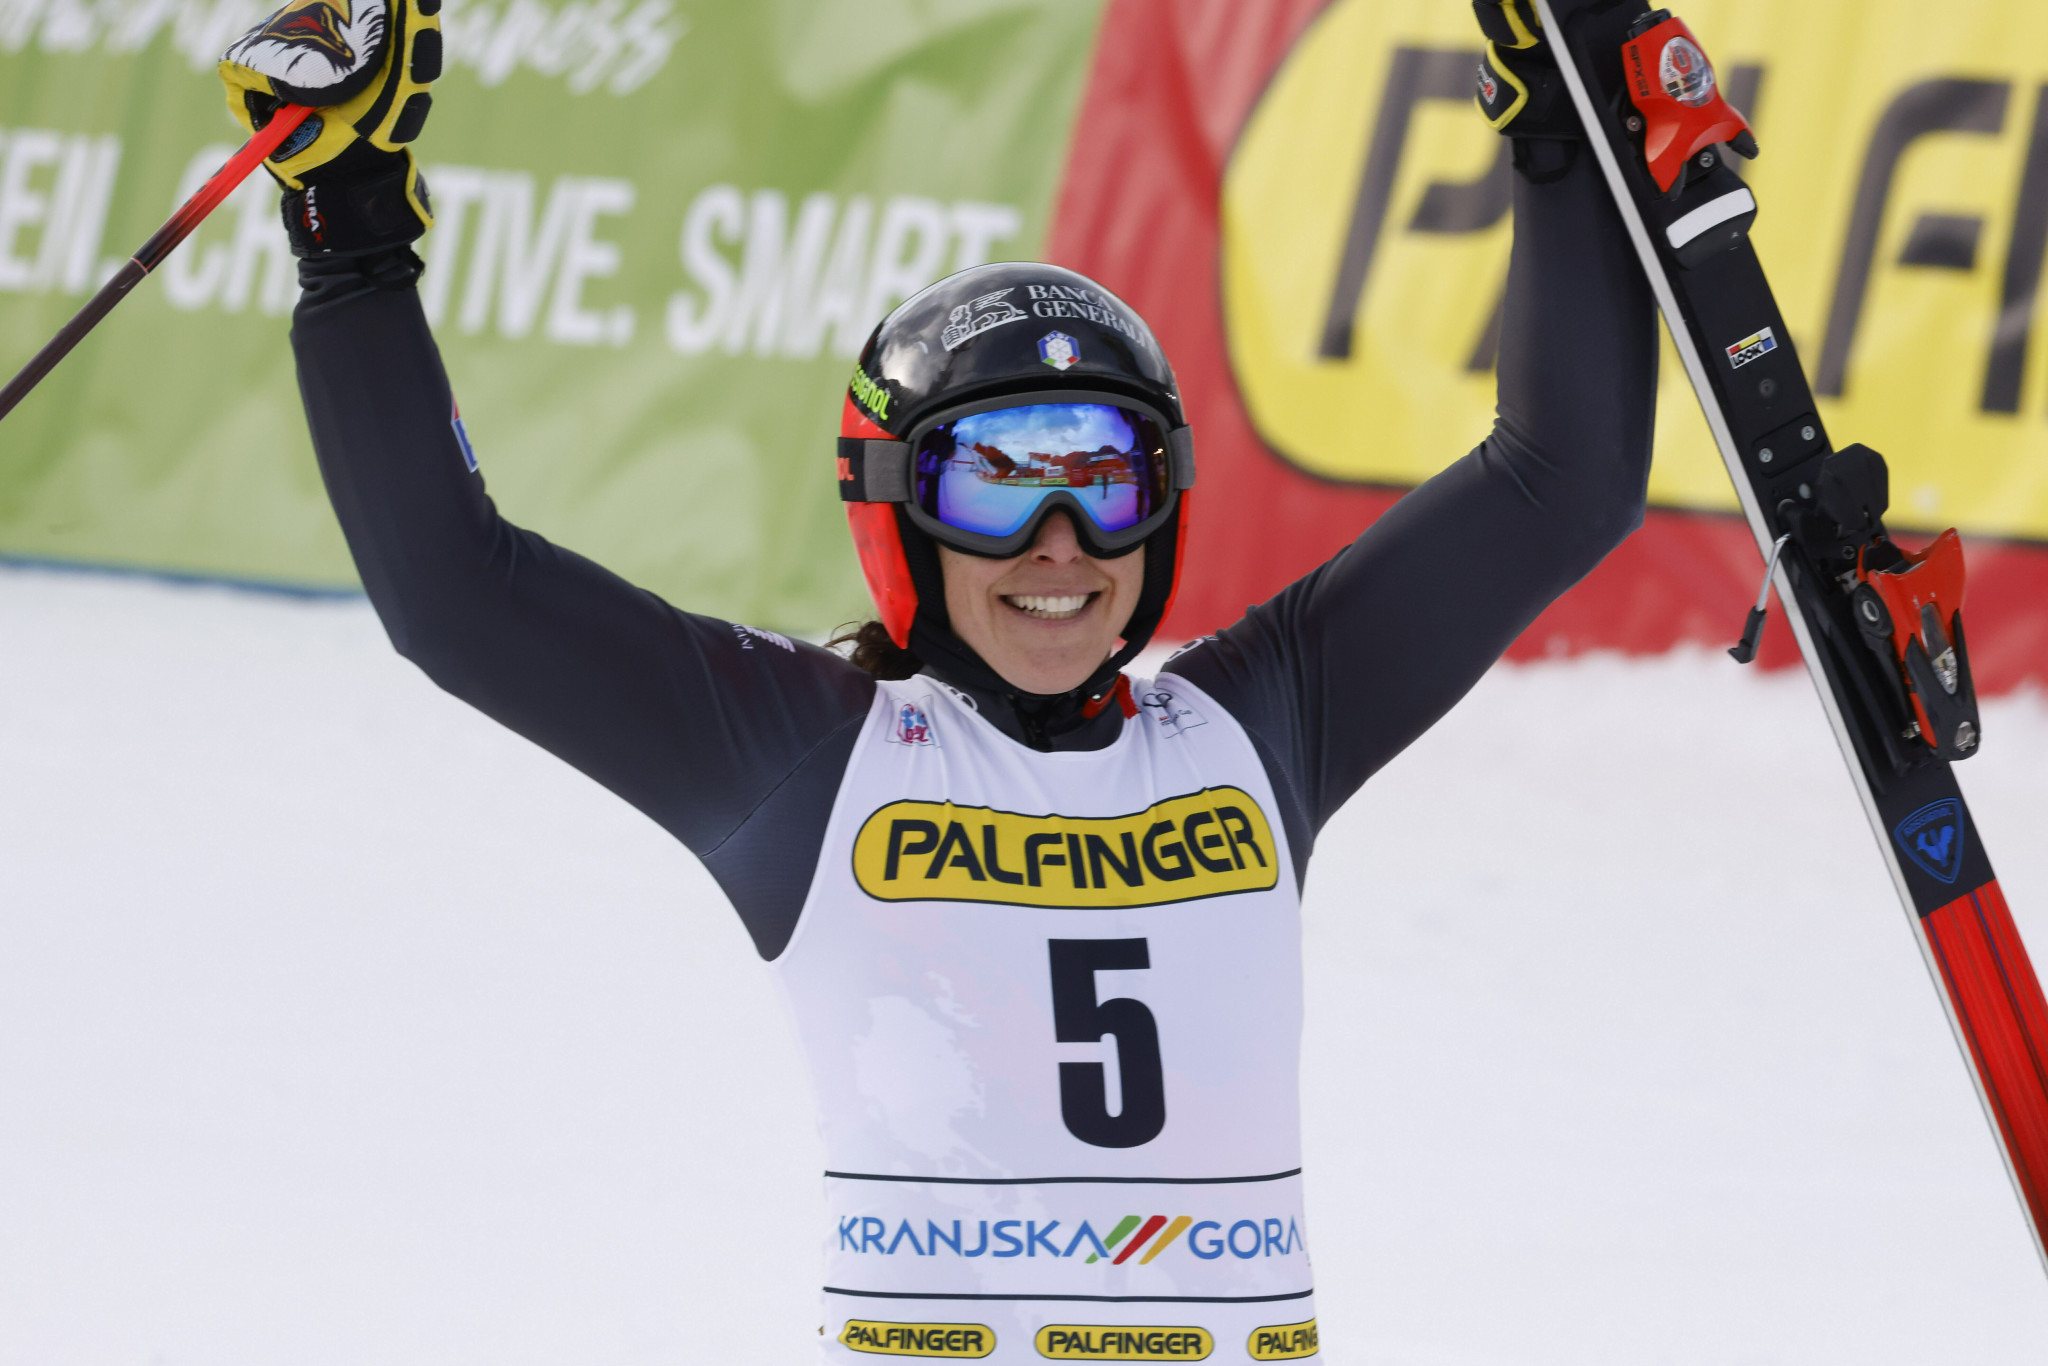 Federica Brignone overtook Sofia Goggia for most World Cup wins by an Italian woman after triumphing in St Anton ©Getty Images 